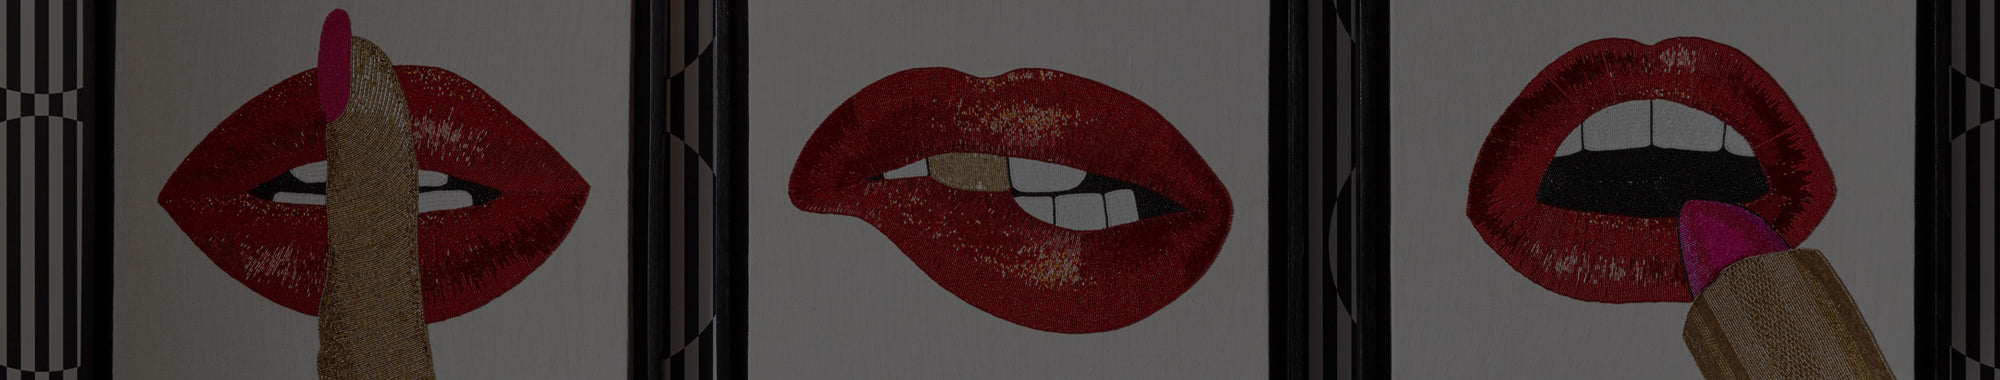 Beaded wall art of red lips